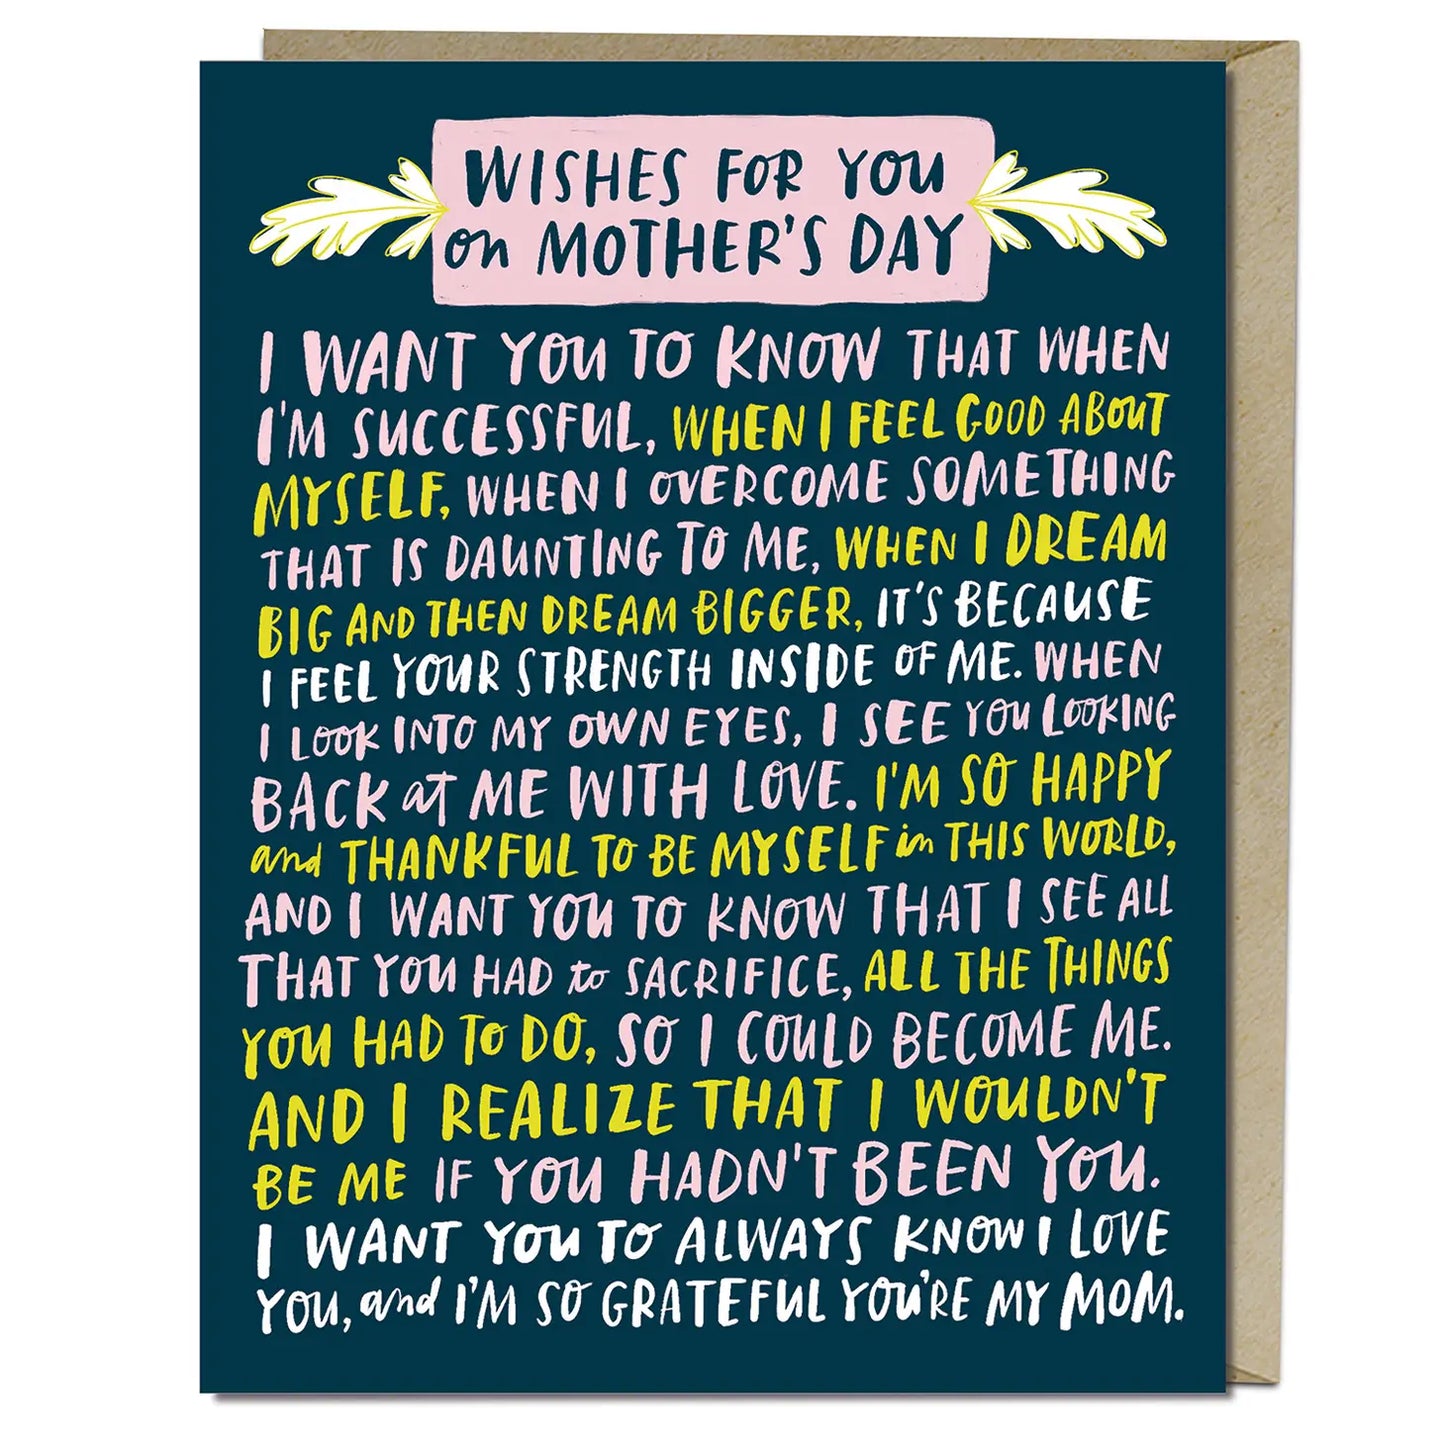 Wishes For You Mother's Day Card